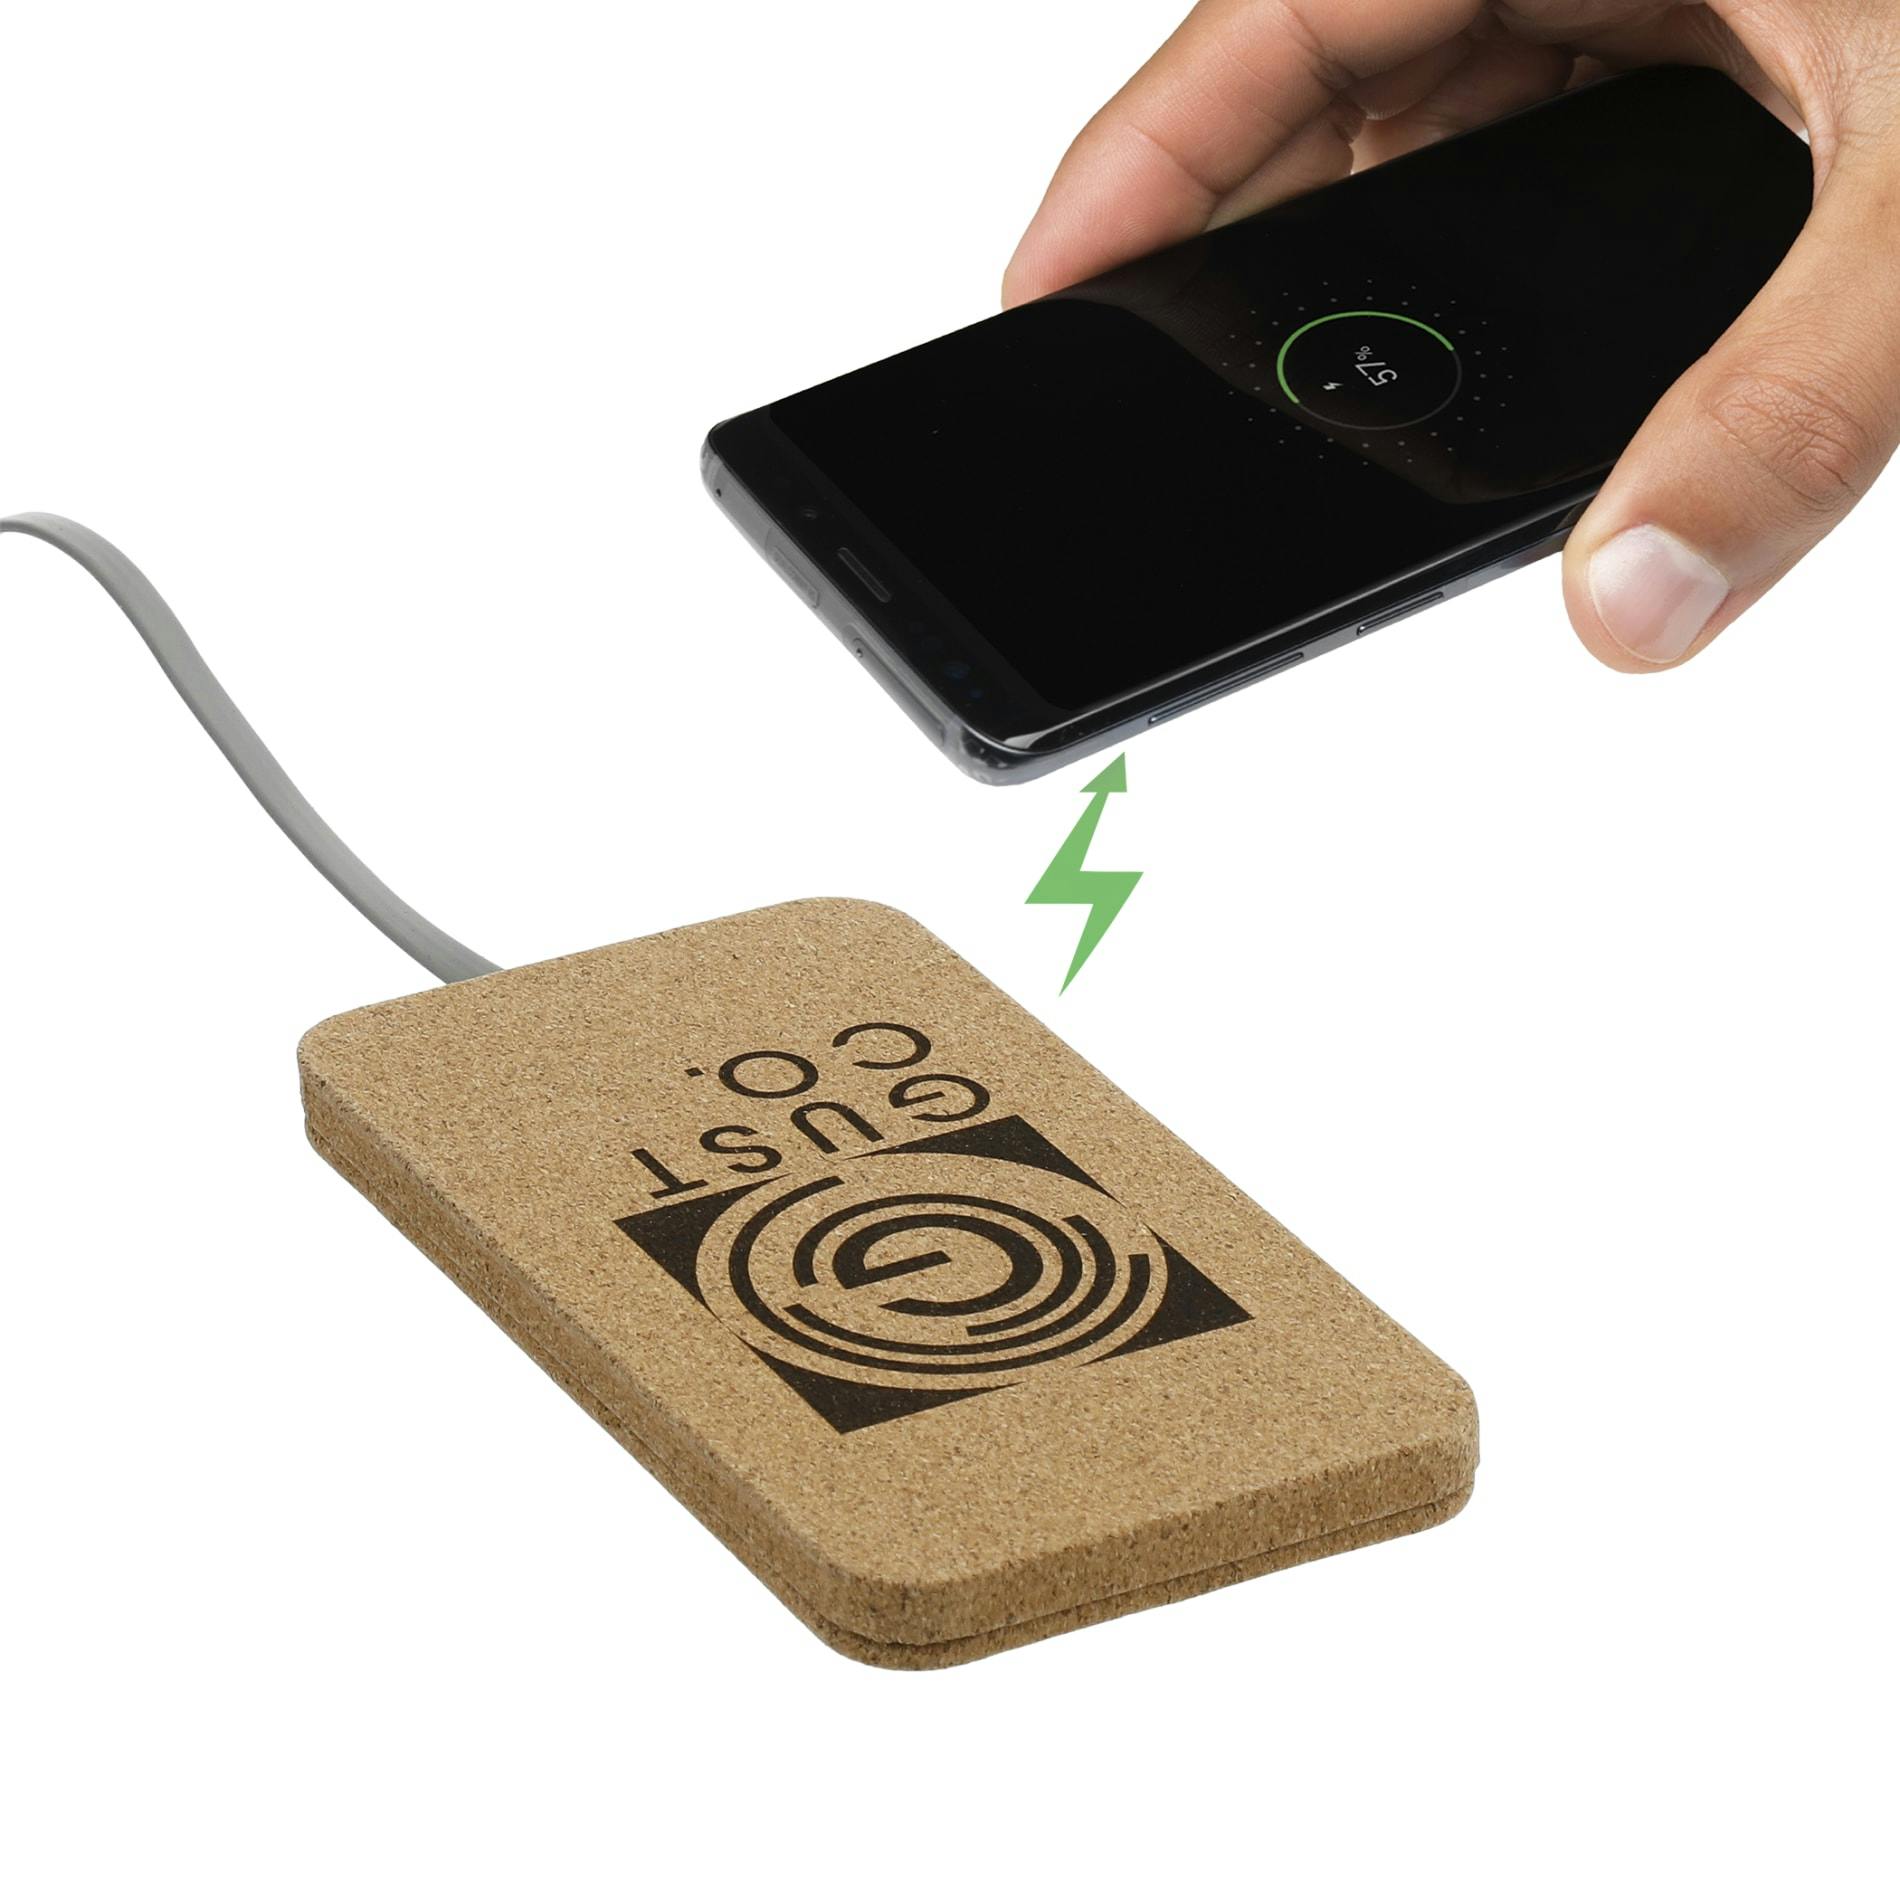 Set in Stone Wireless Charging Stand - additional Image 5